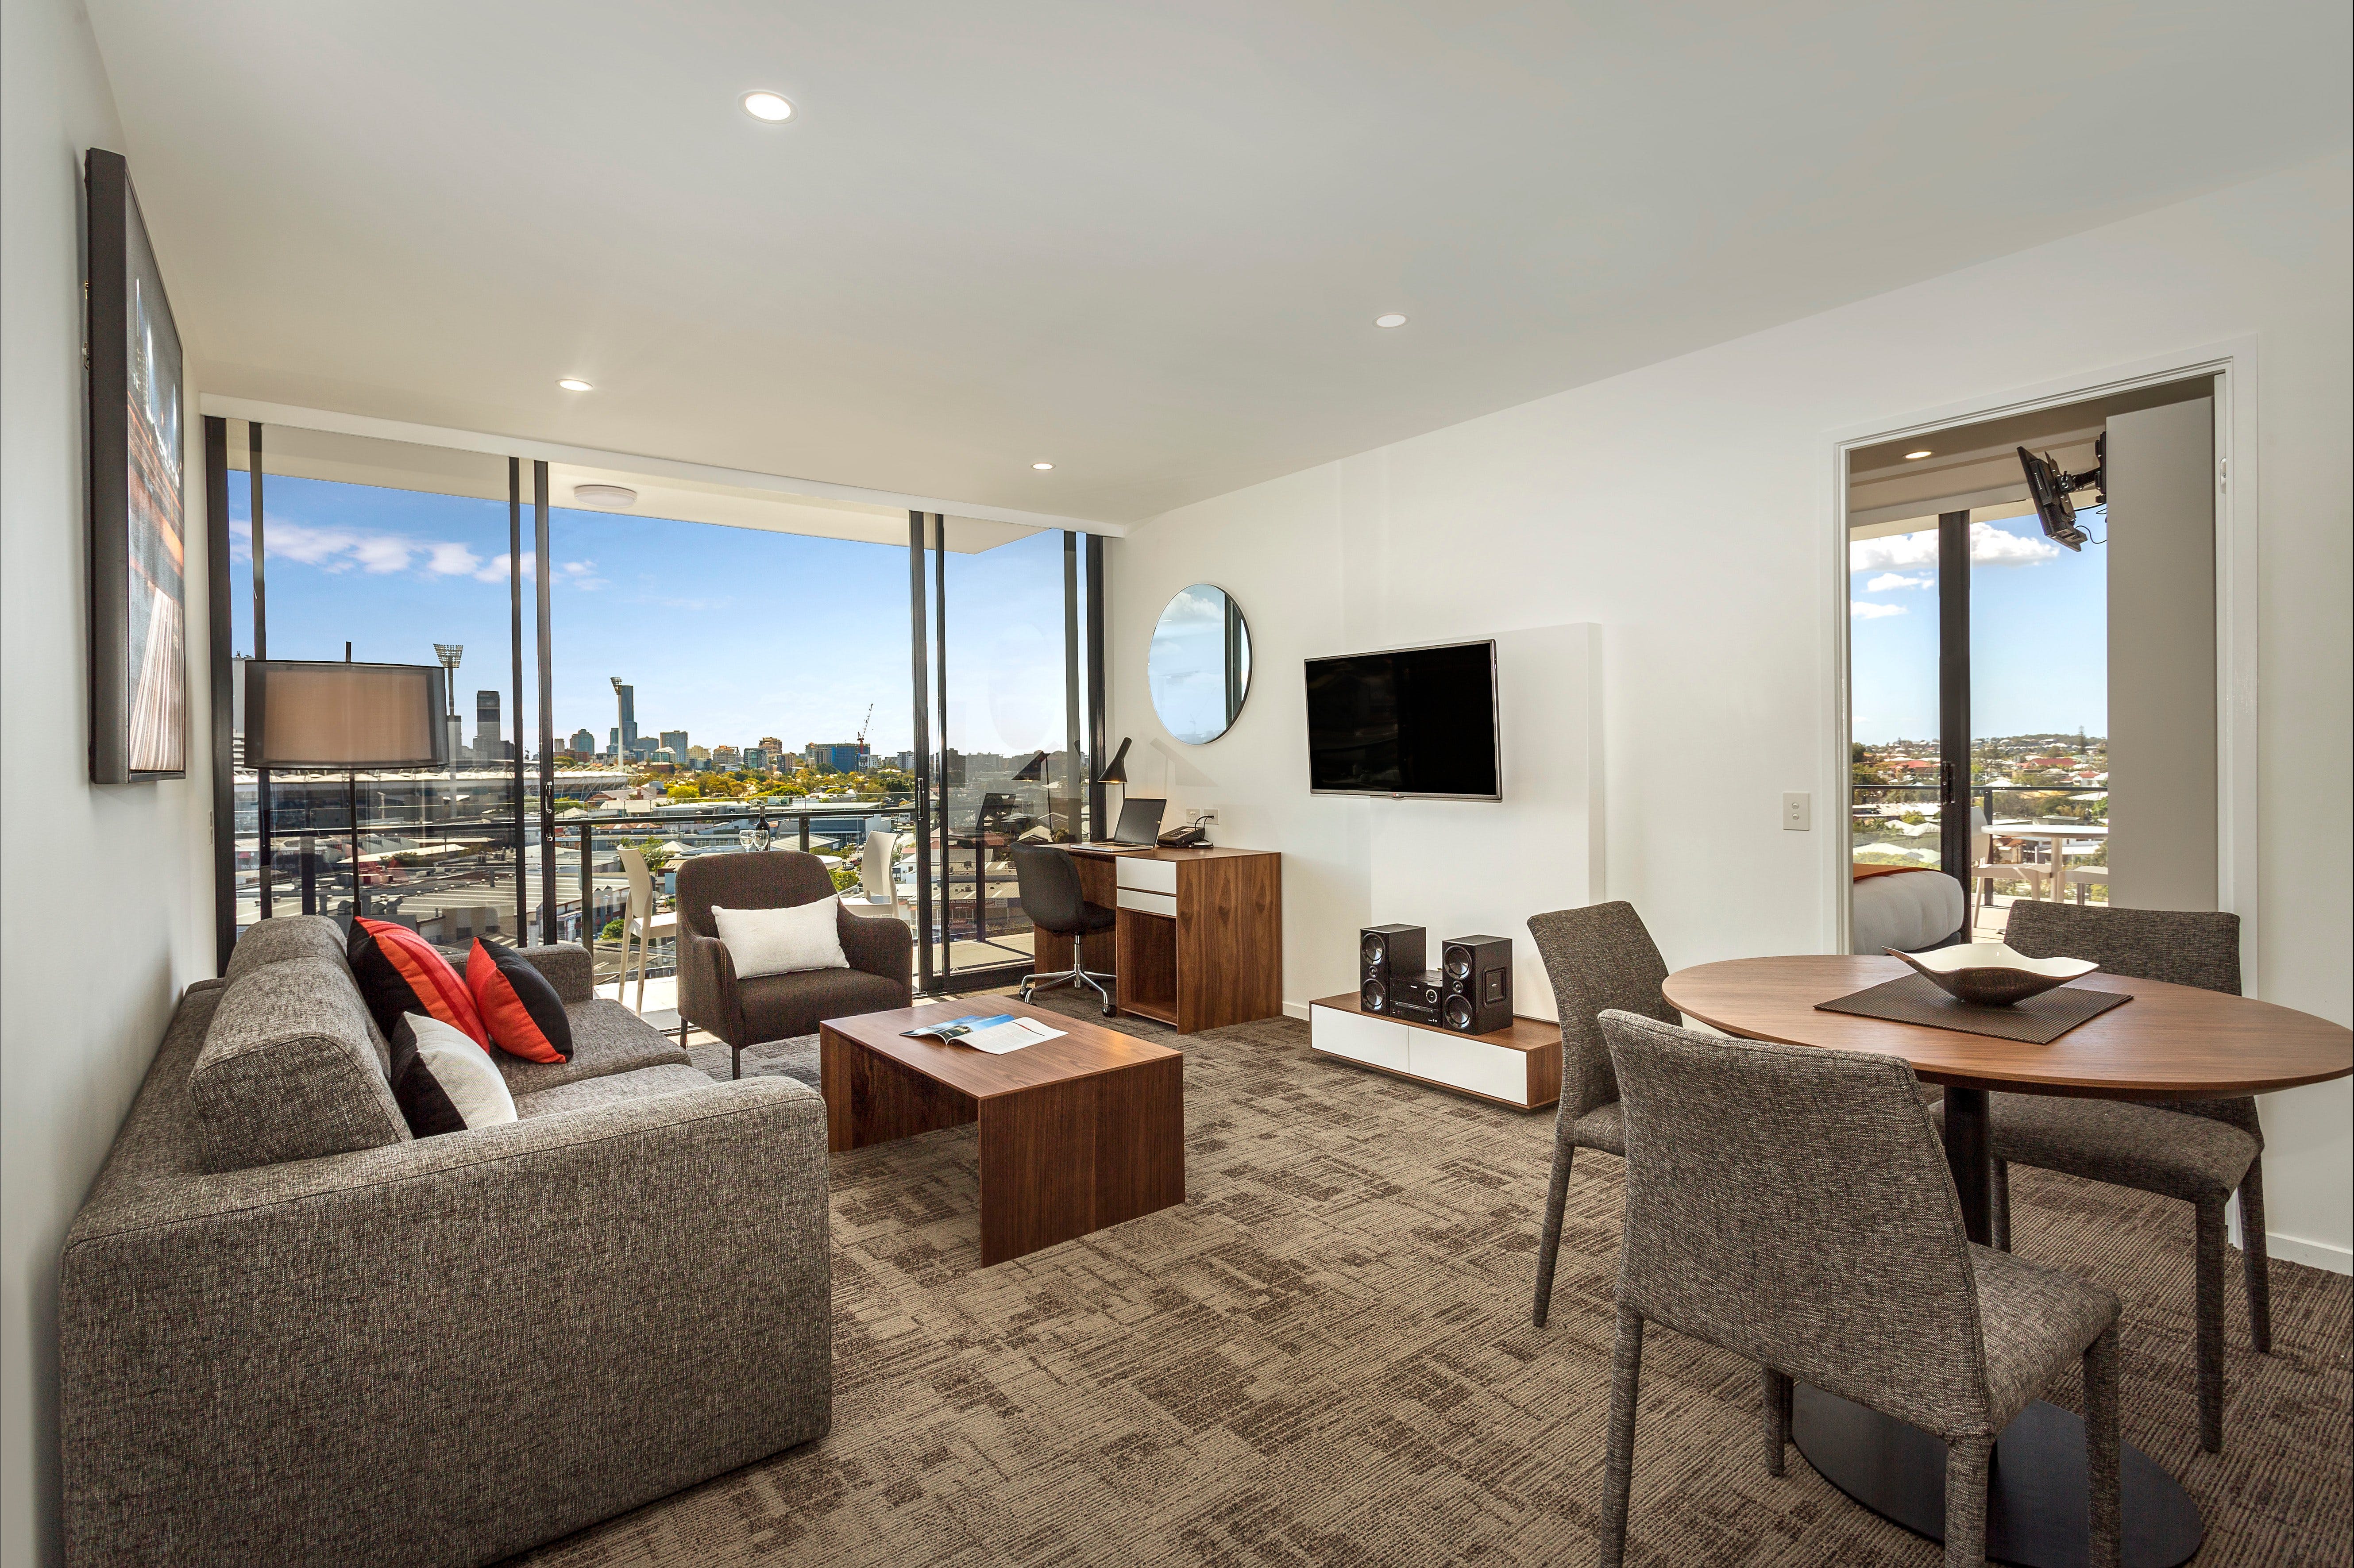 Quest Woolloongabba - Coogee Beach Accommodation